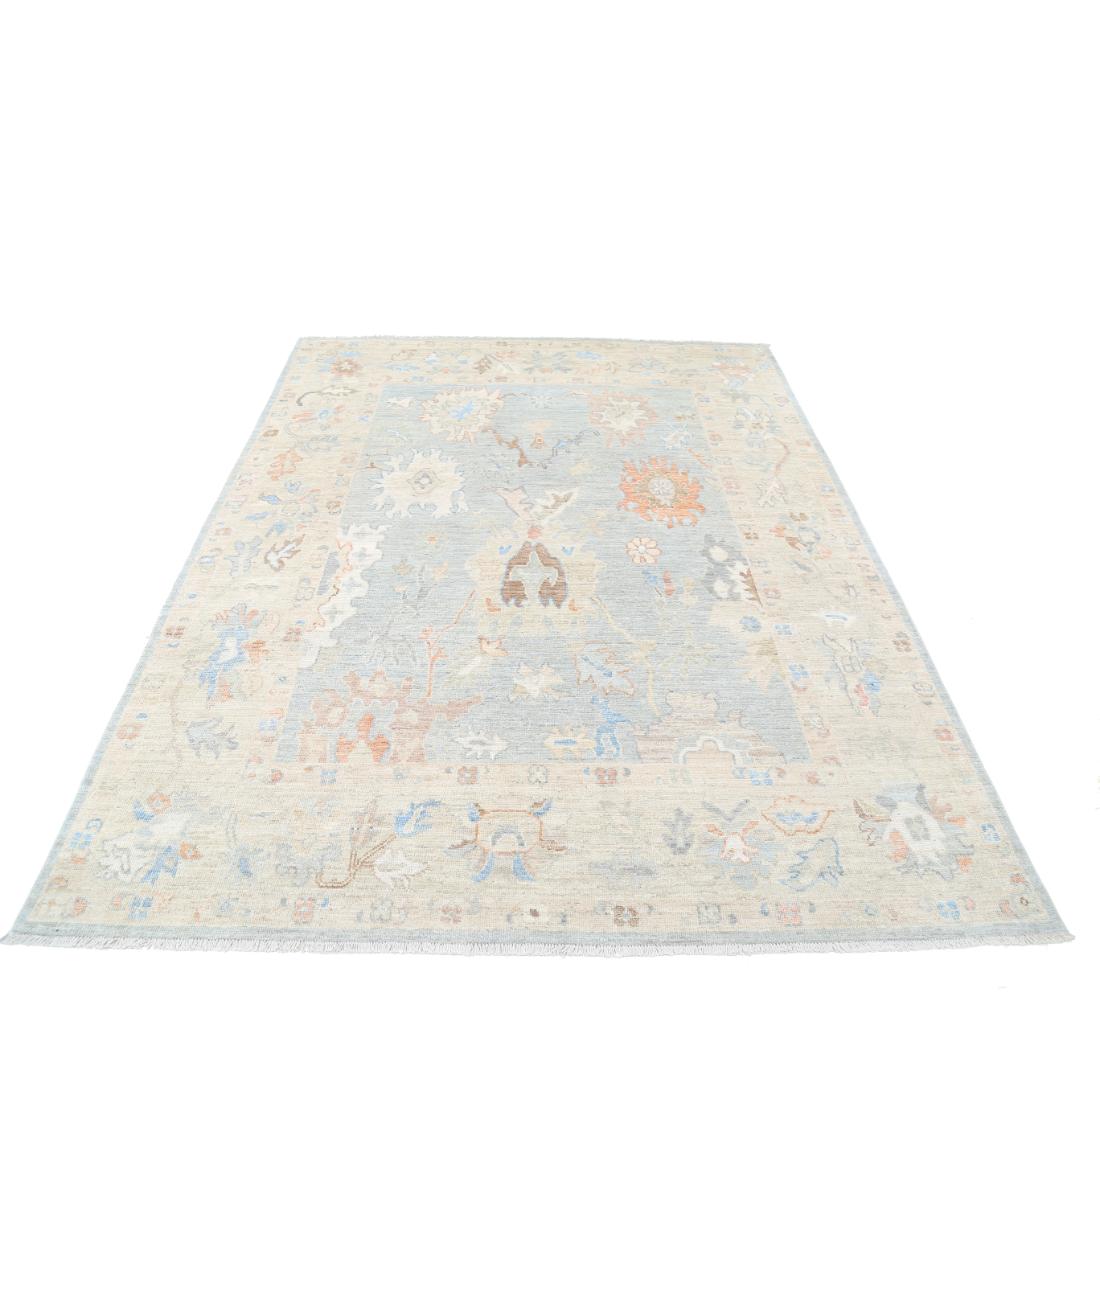 Hand Knotted Oushak Wool Rug - 6'4'' x 8'2'' 6' 4" X 8' 2" (193 X 249) / Blue / Ivory